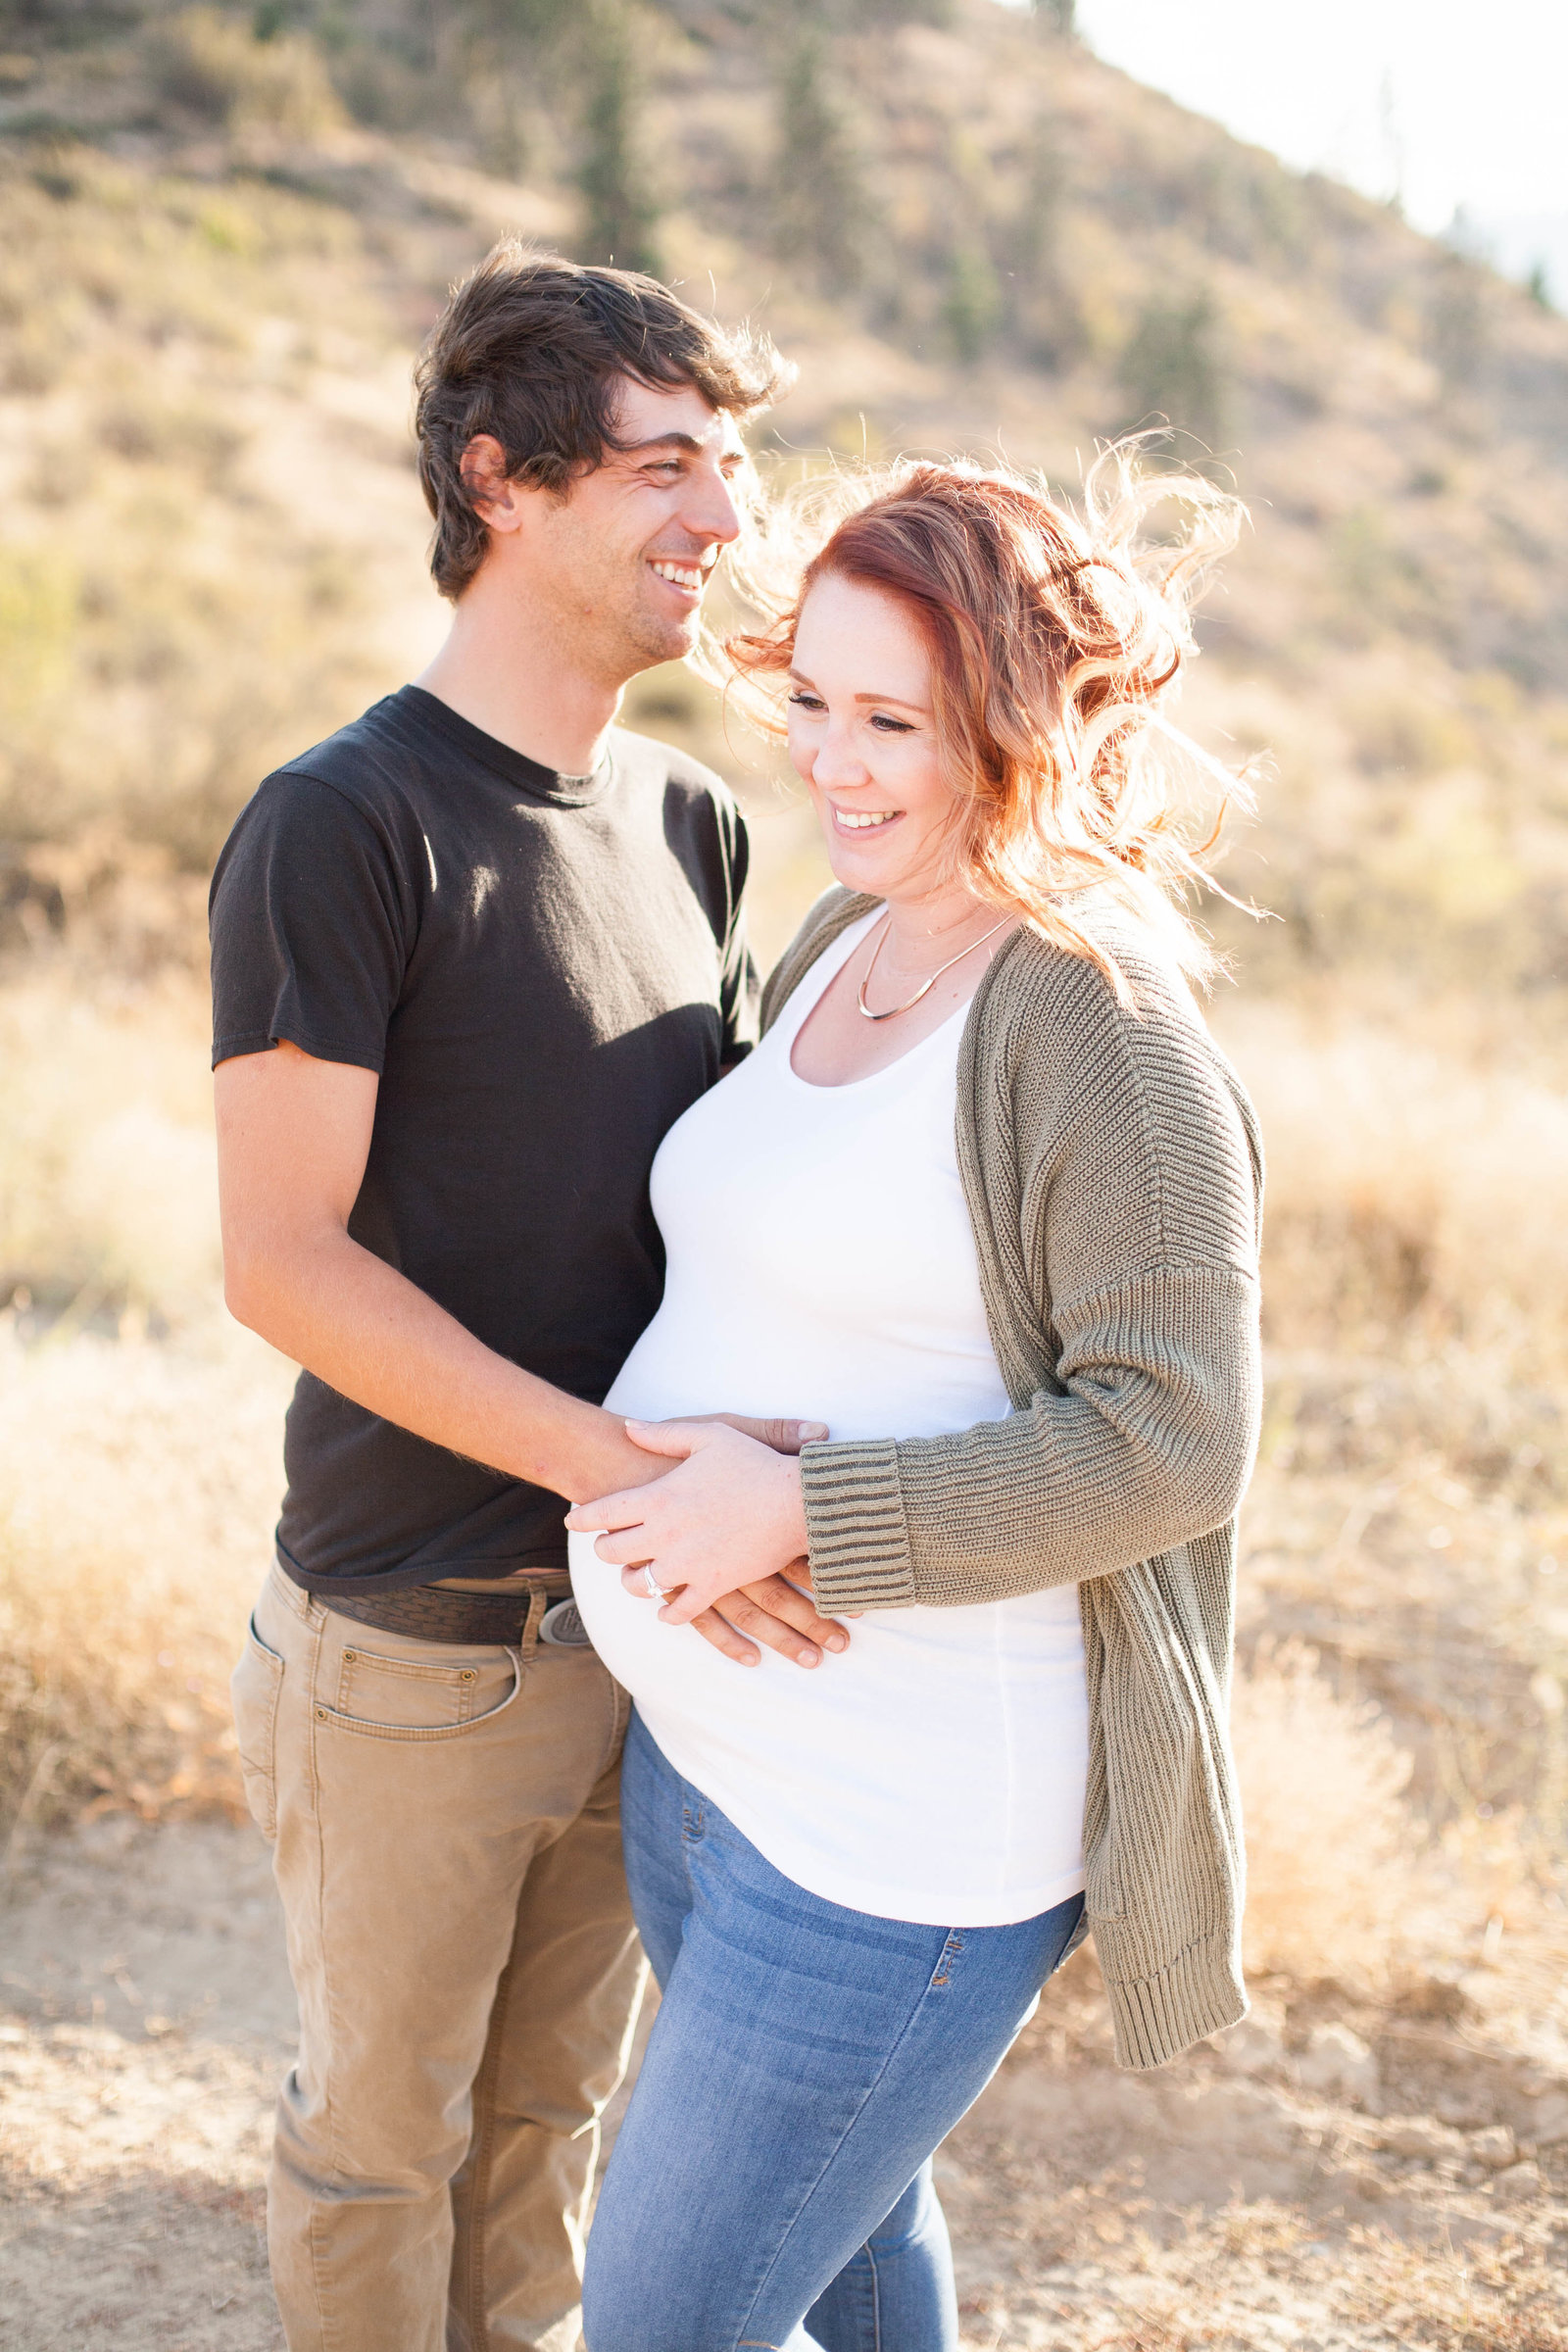 A Wenatchee maternity photoshoot featuring a man and woman embracing.